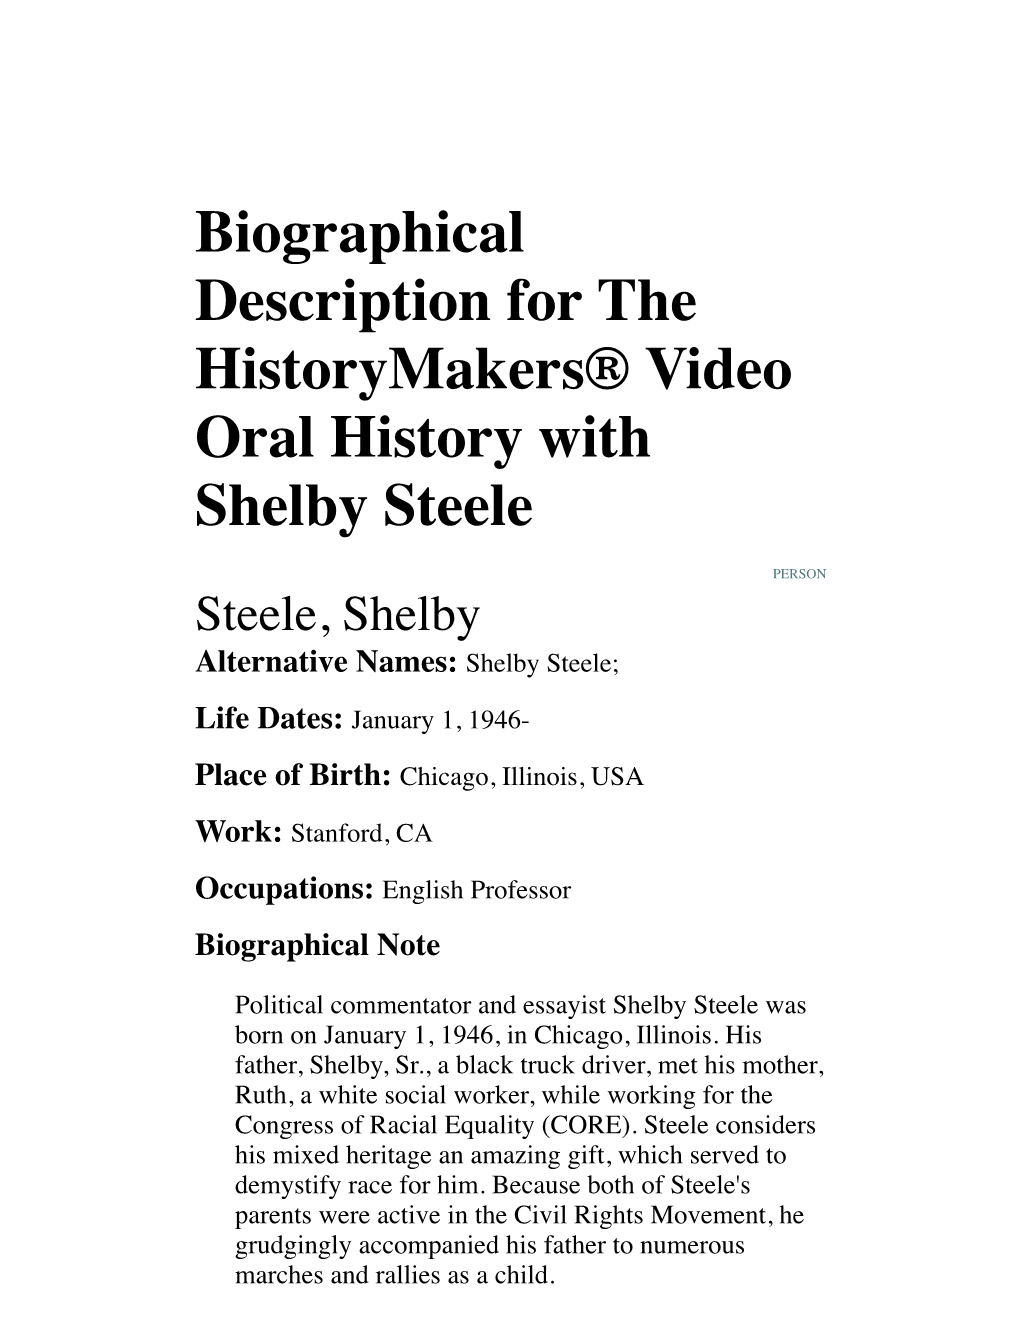 Biographical Description for the Historymakers® Video Oral History with Shelby Steele